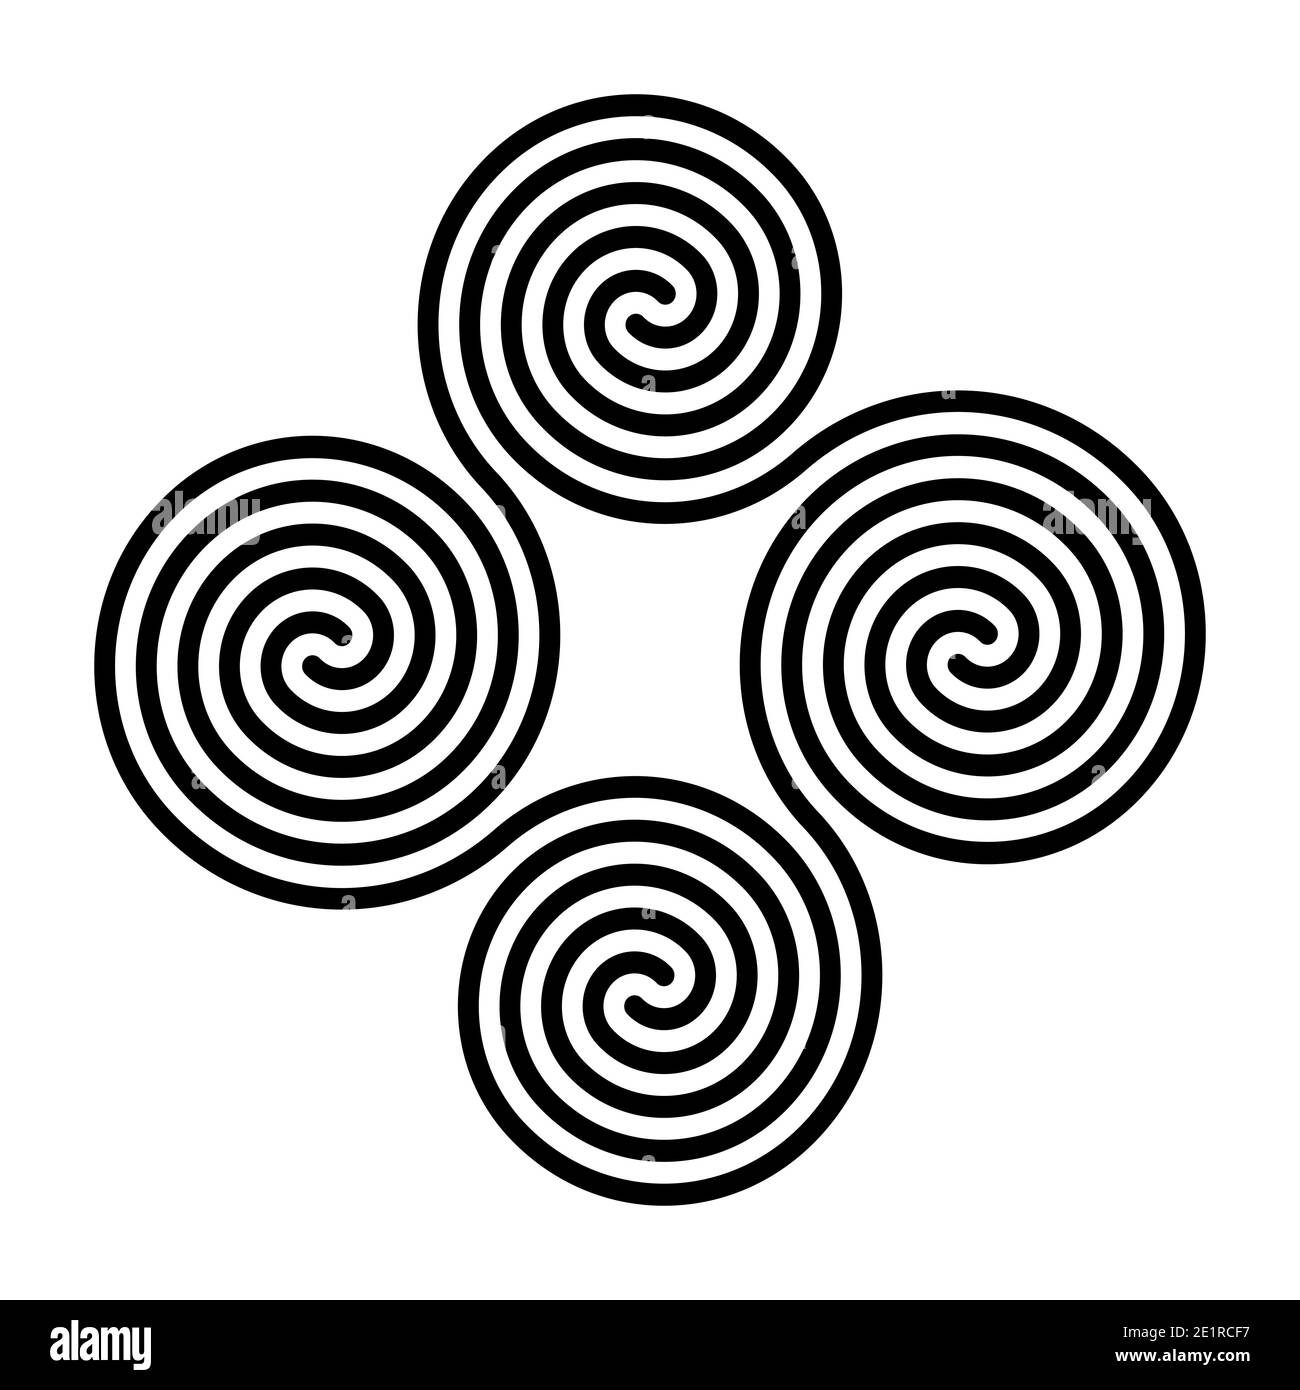 Four connected Celtic double spirals. Quadruple spiral, formed by four interlocked Archimedean spirals. Symbol and motif. Stock Photo